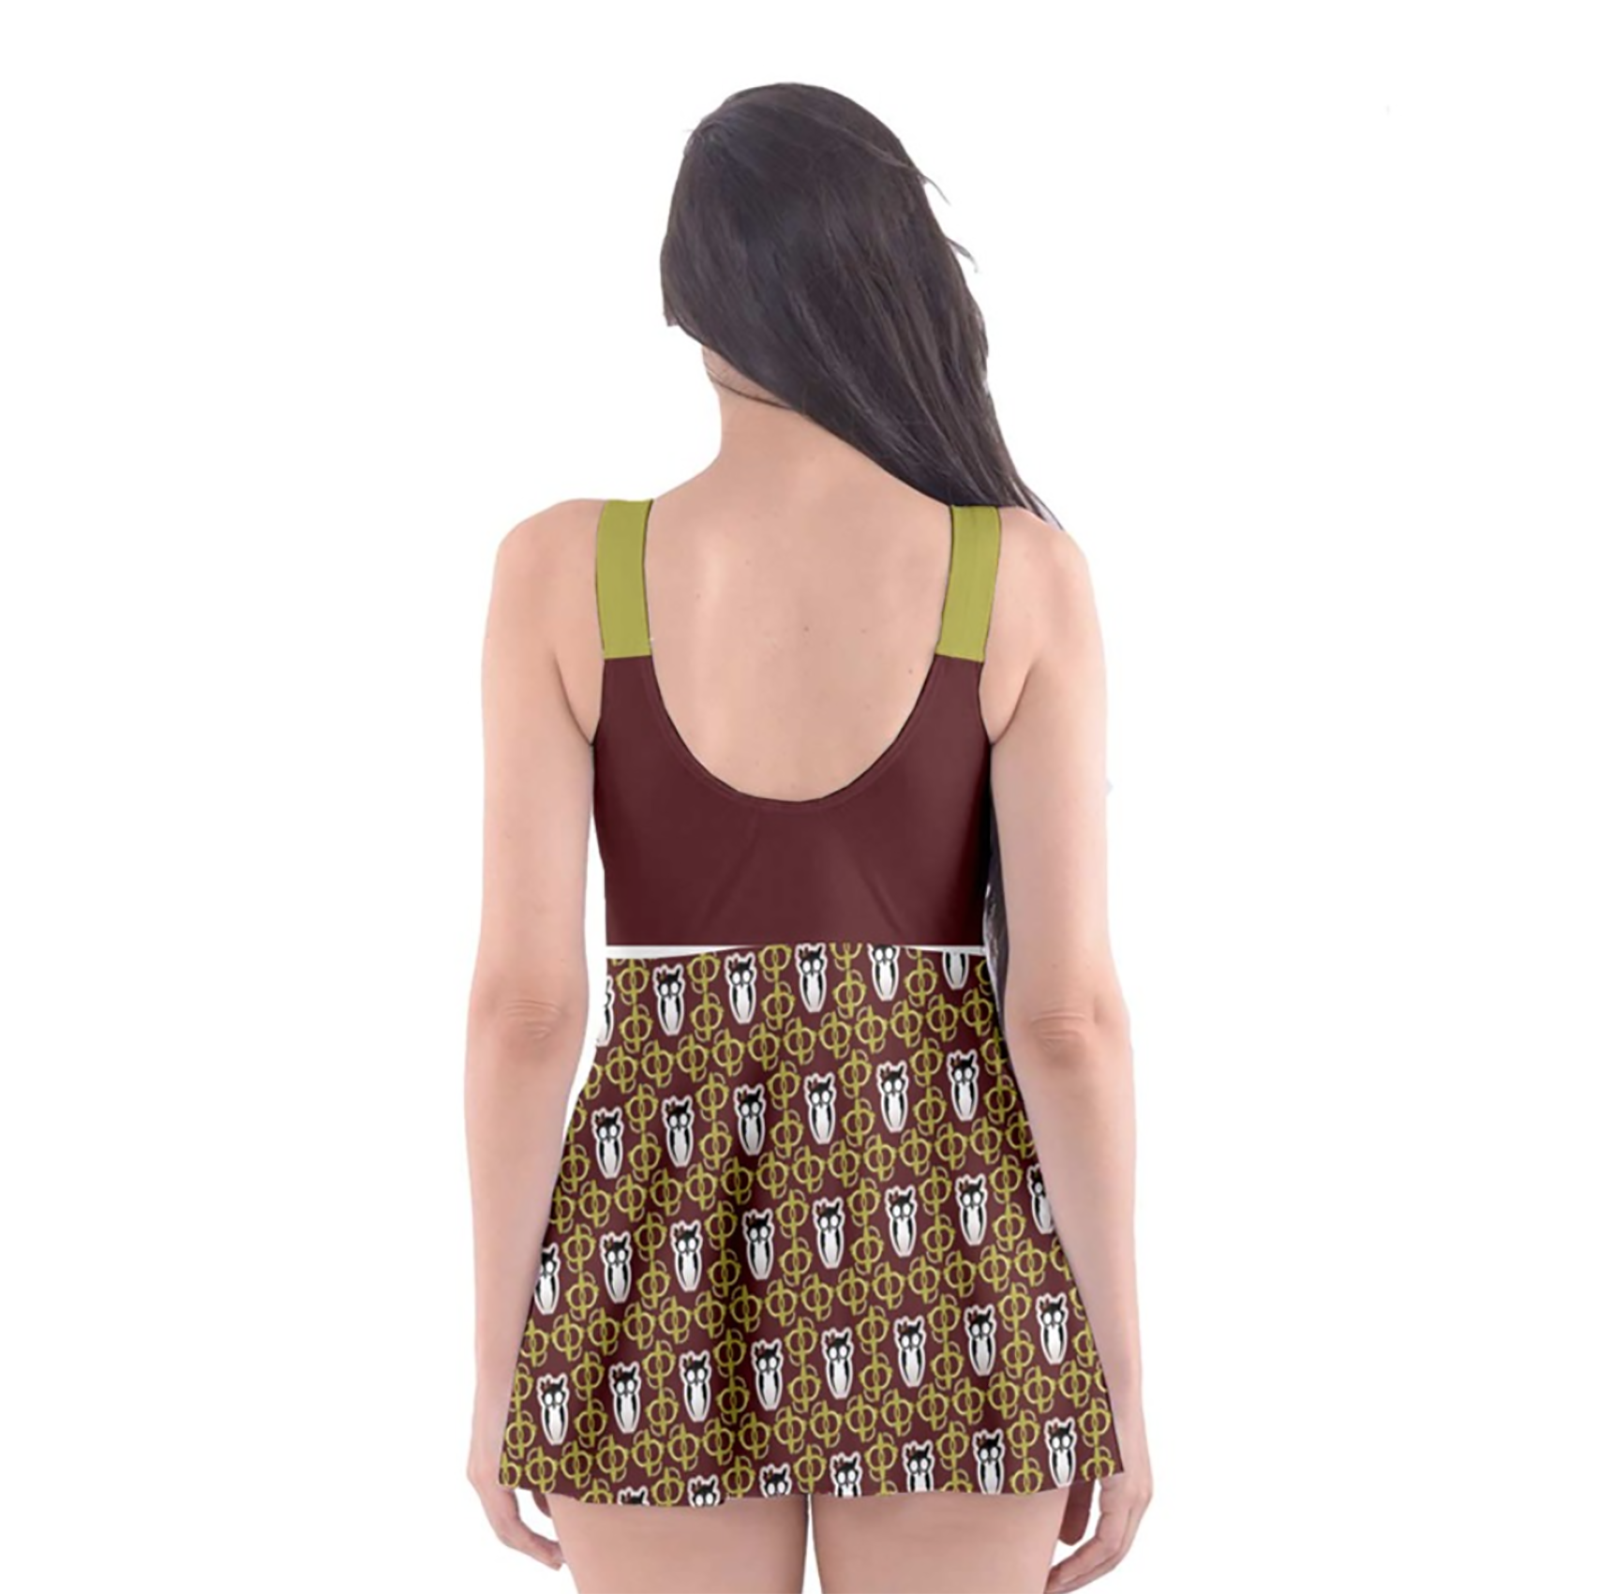 Red/gold Owl (women's) Skater Dress Swimsuit - Inspired by Gryffindor